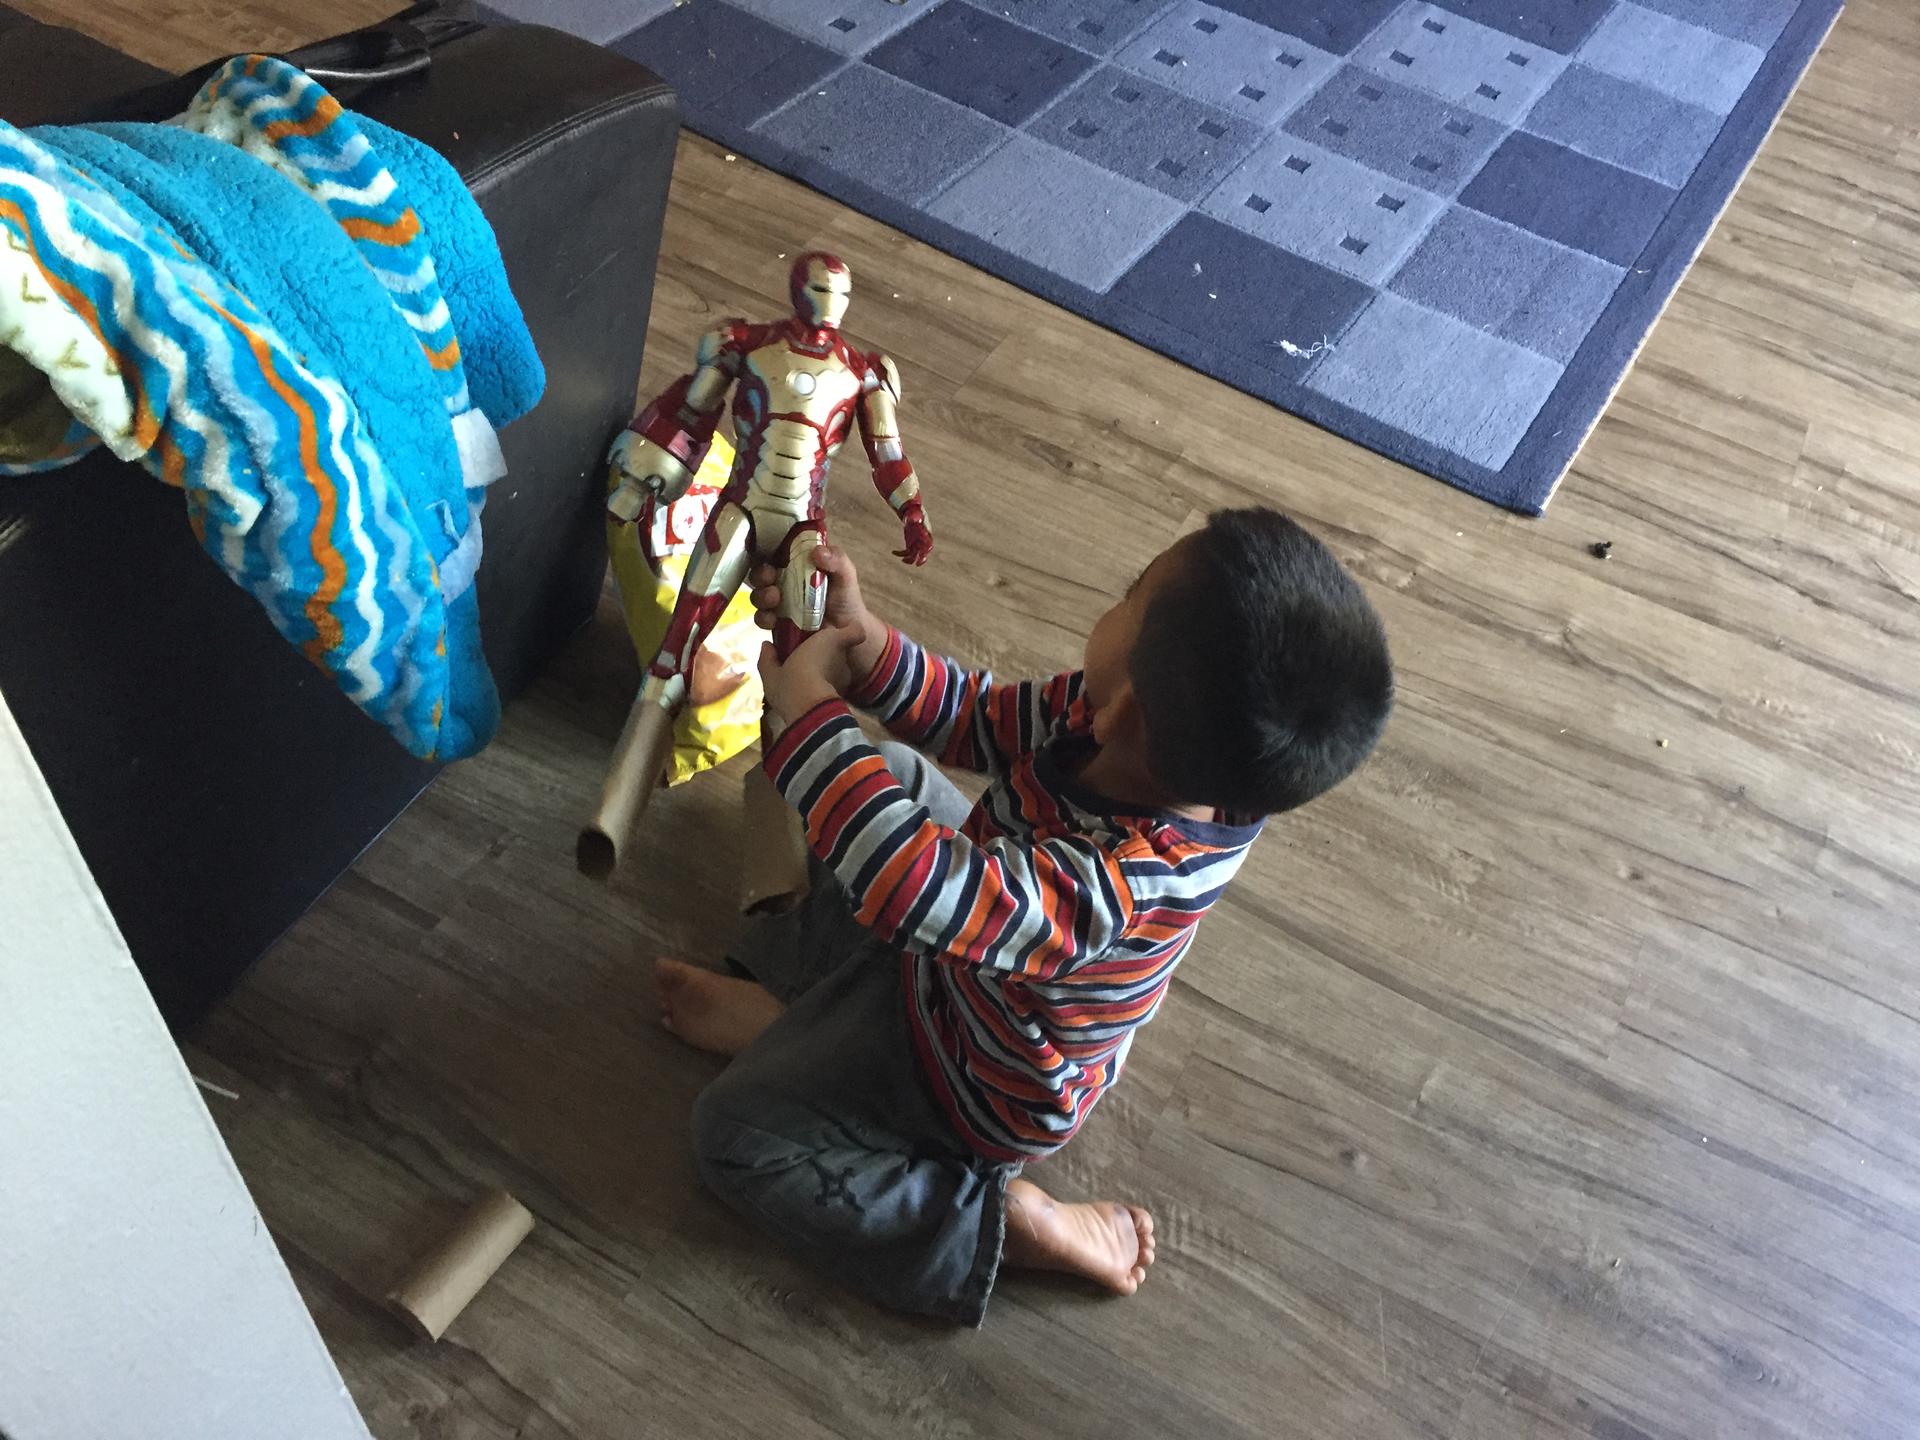 Boy sitting on floor playing with action figure